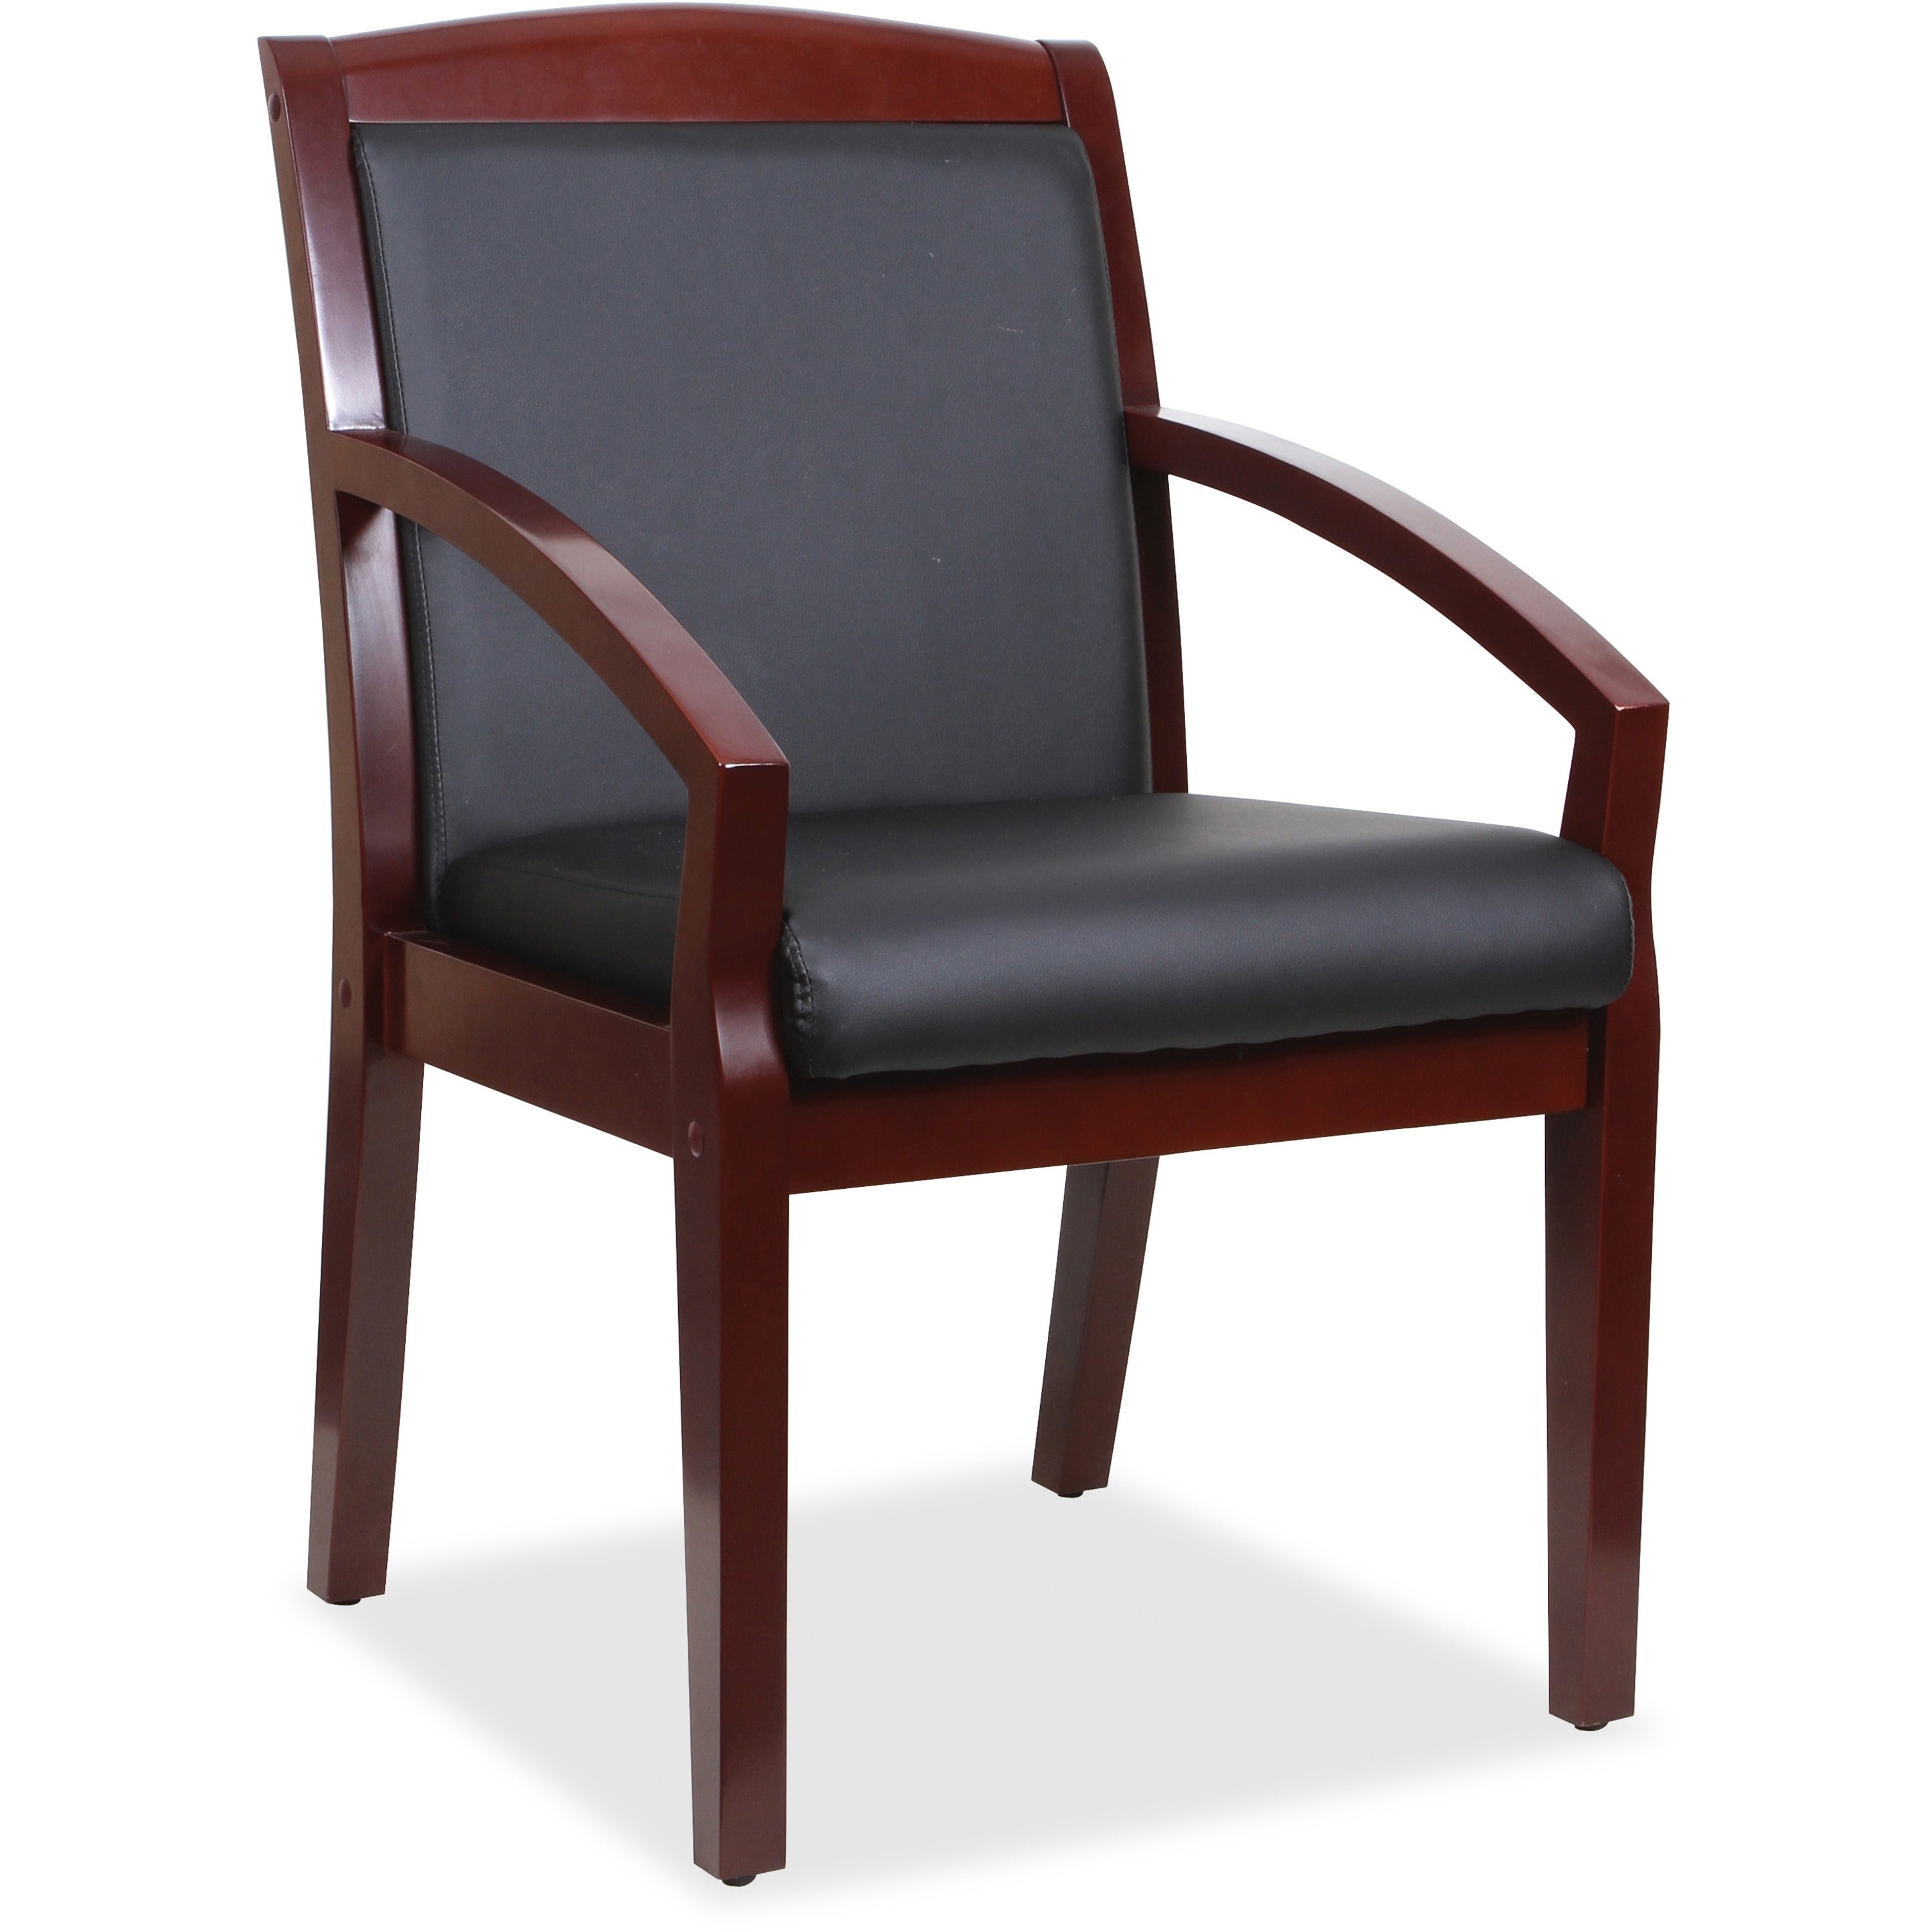 lorell-sloping-arms-wood-frame-guest-chair-black-bonded-leather-seat-black-bonded-leather-back-mahogany-solid-wood-rubberwood-frame-four-legged-base-1-each_llr20020 - 1